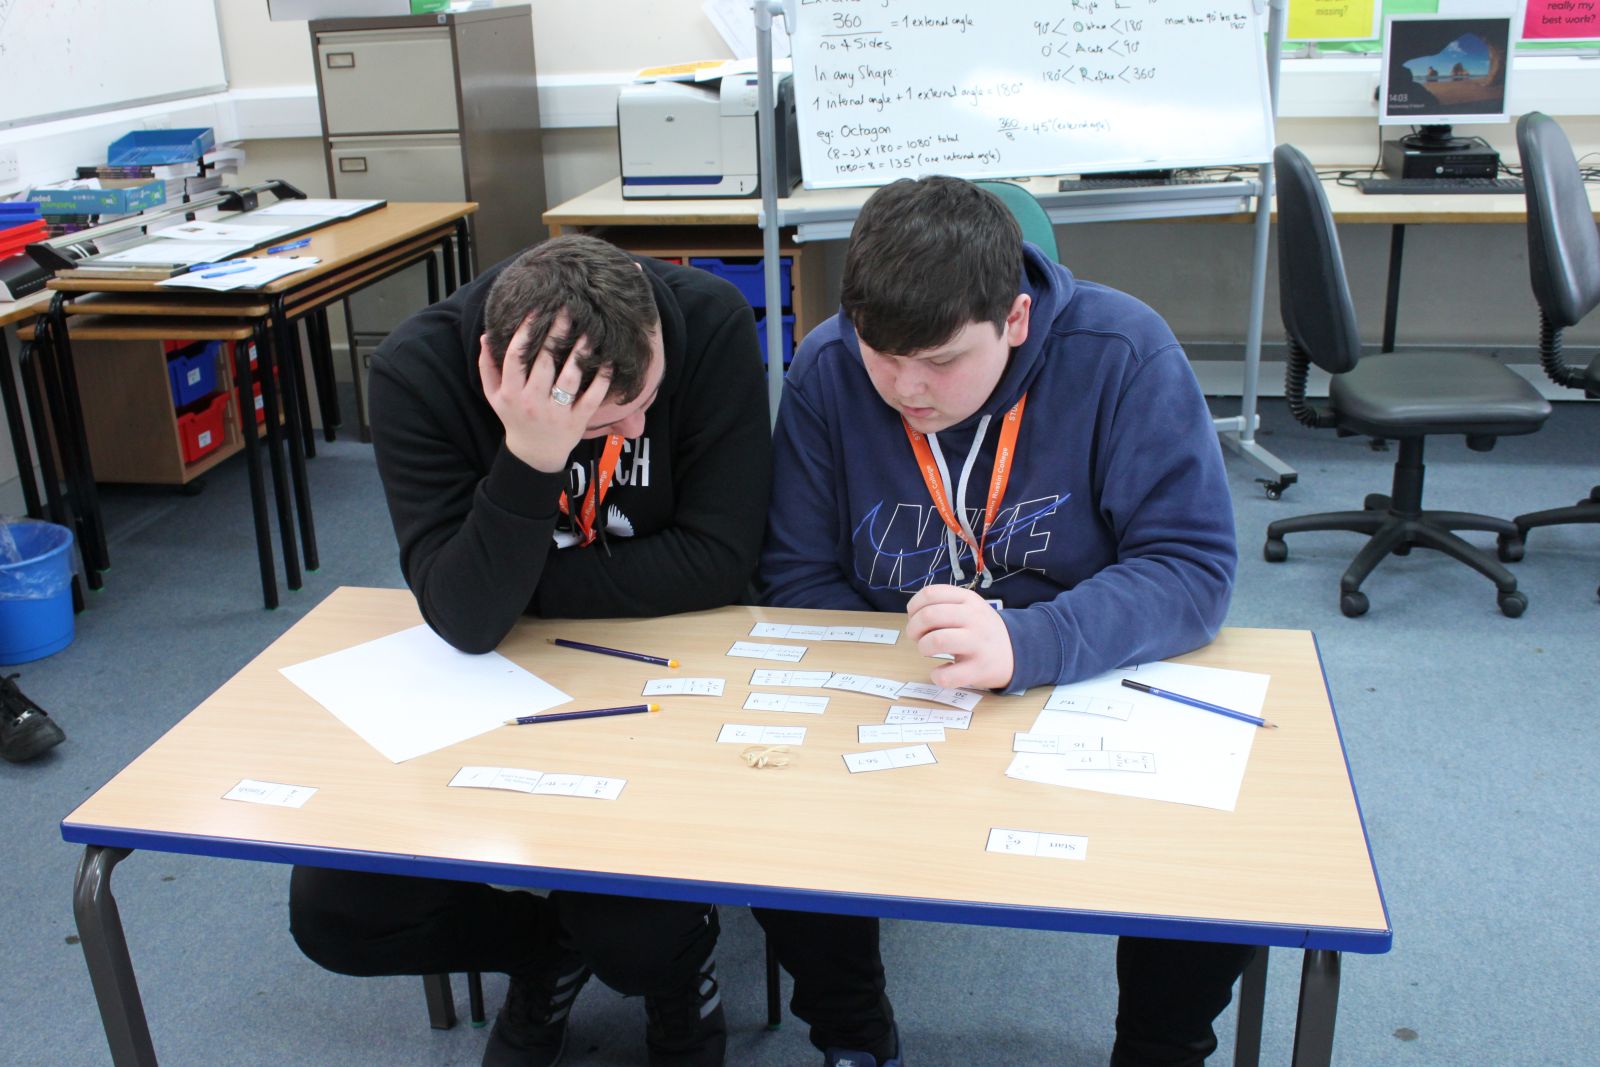 Liam and Jack working on their Tarsia puzzle